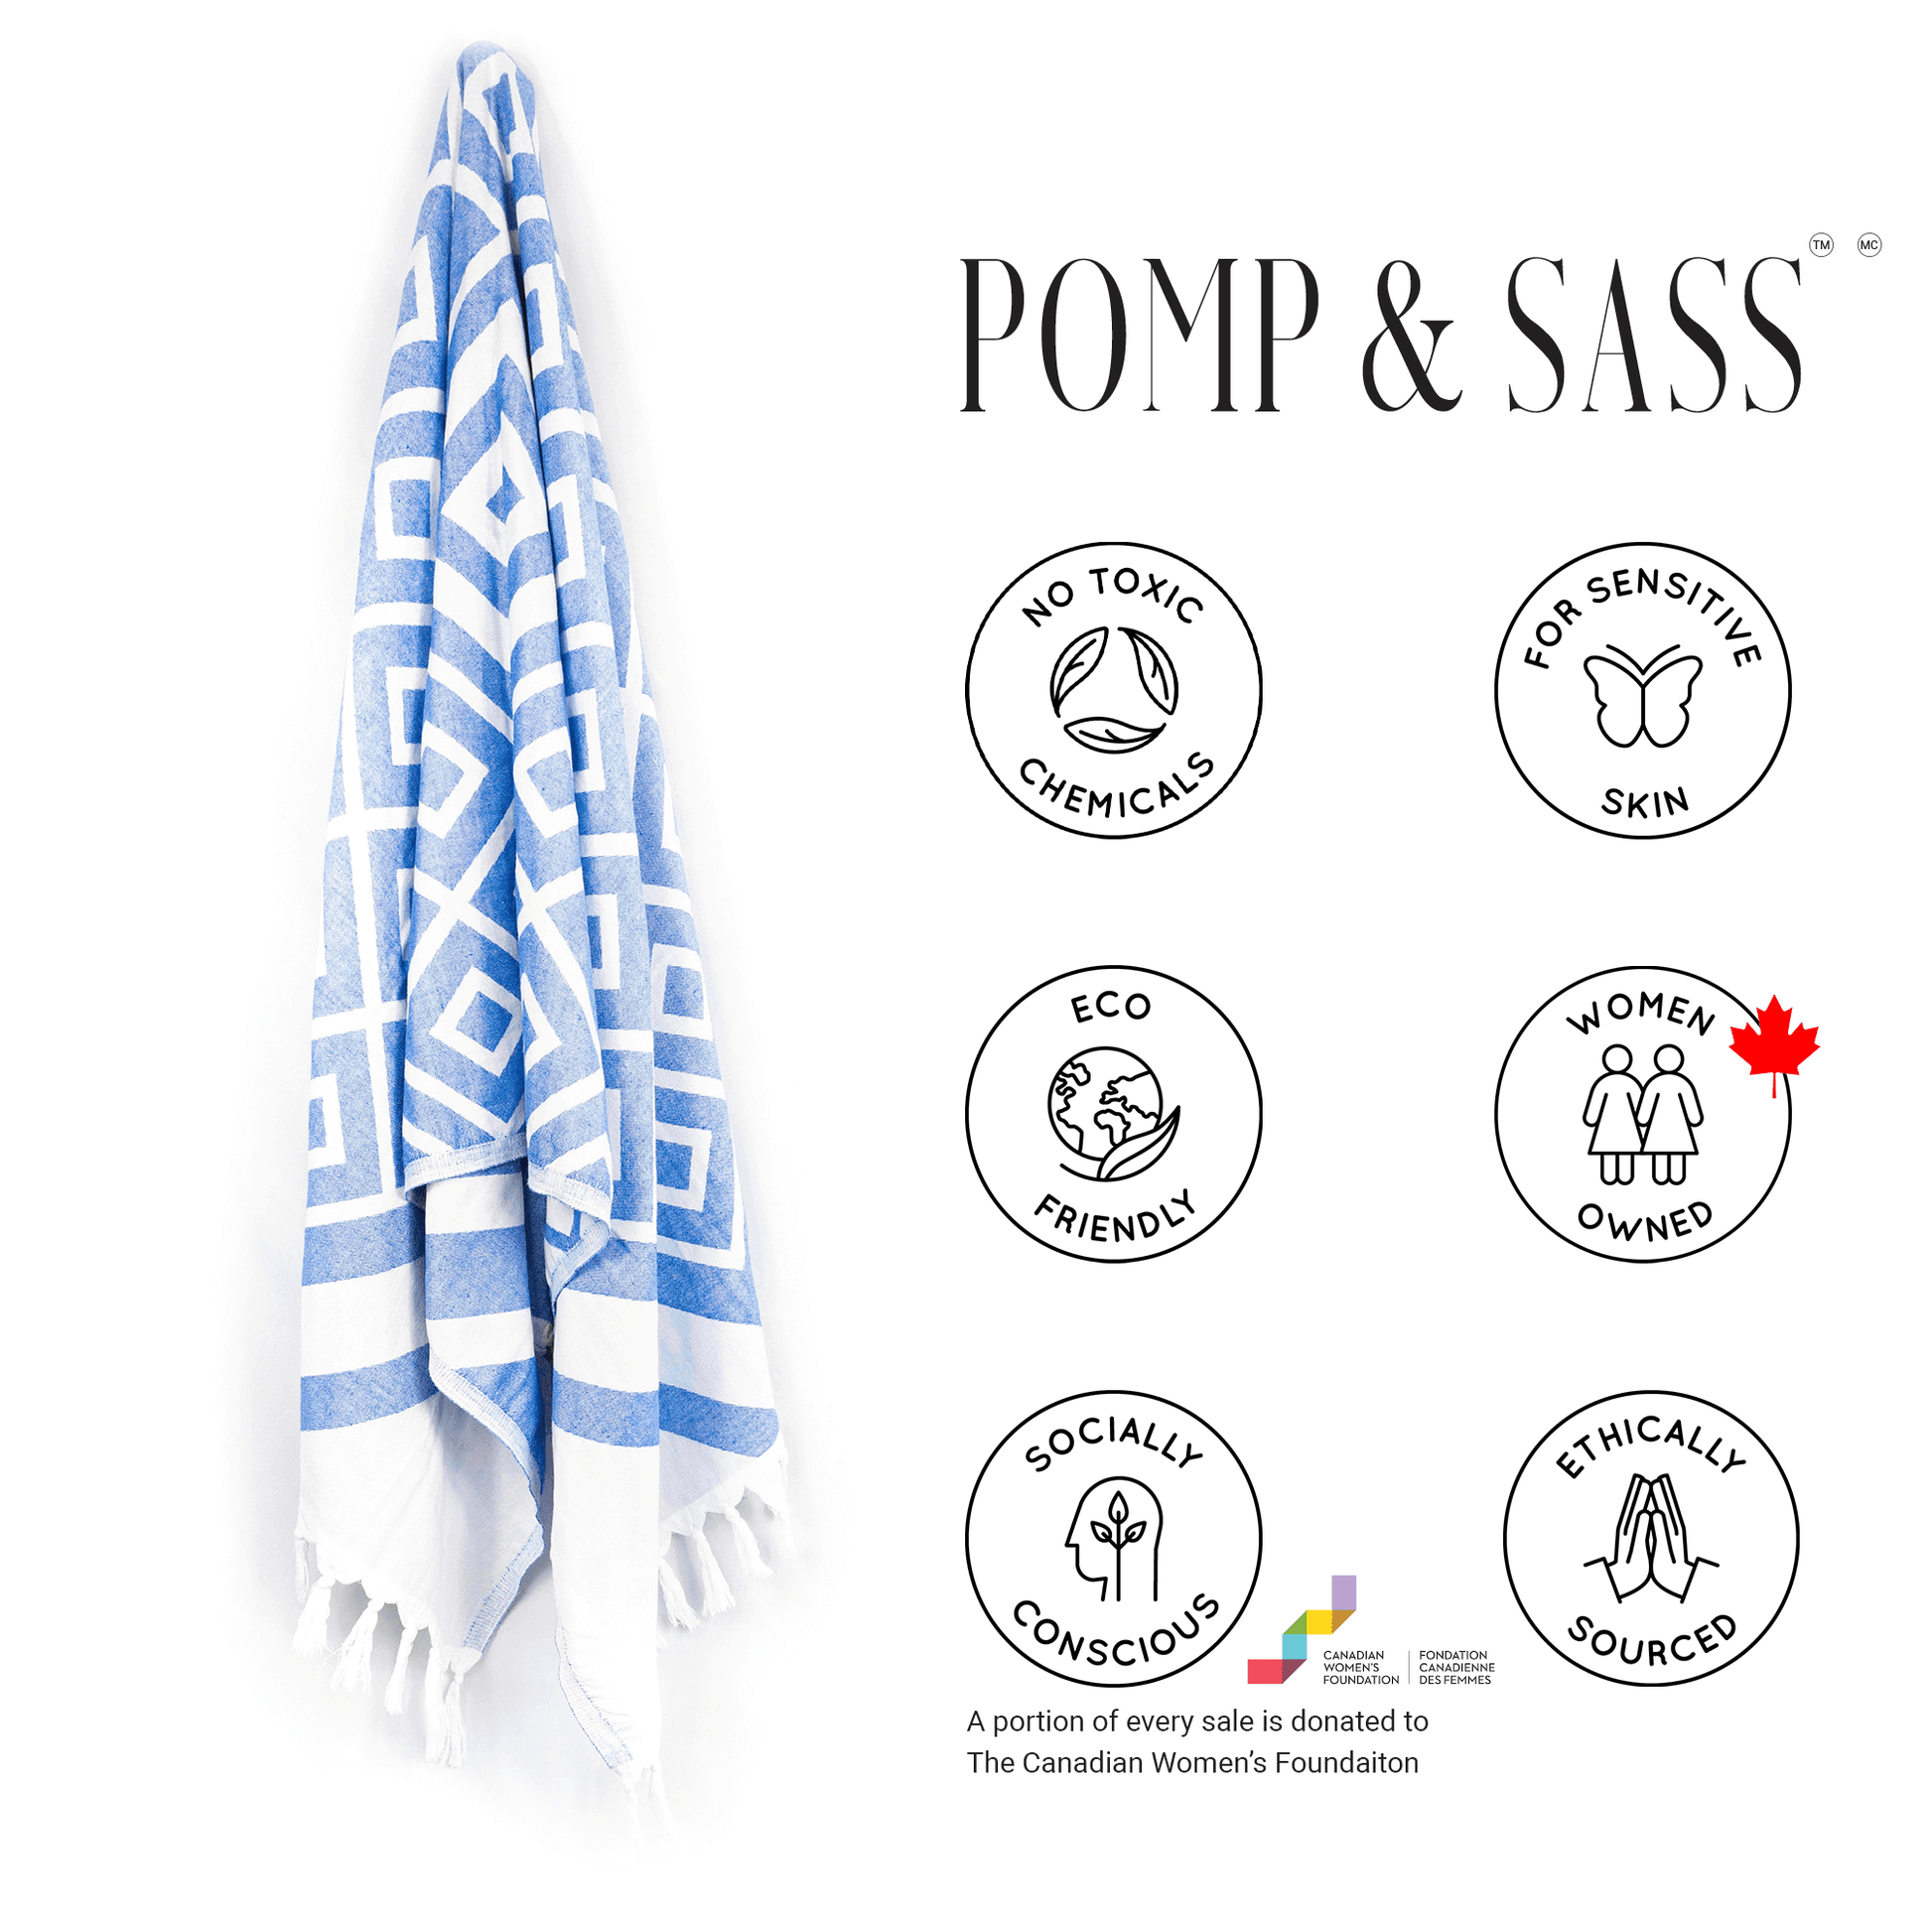 Navy and white Turkish towel from a Canadian company